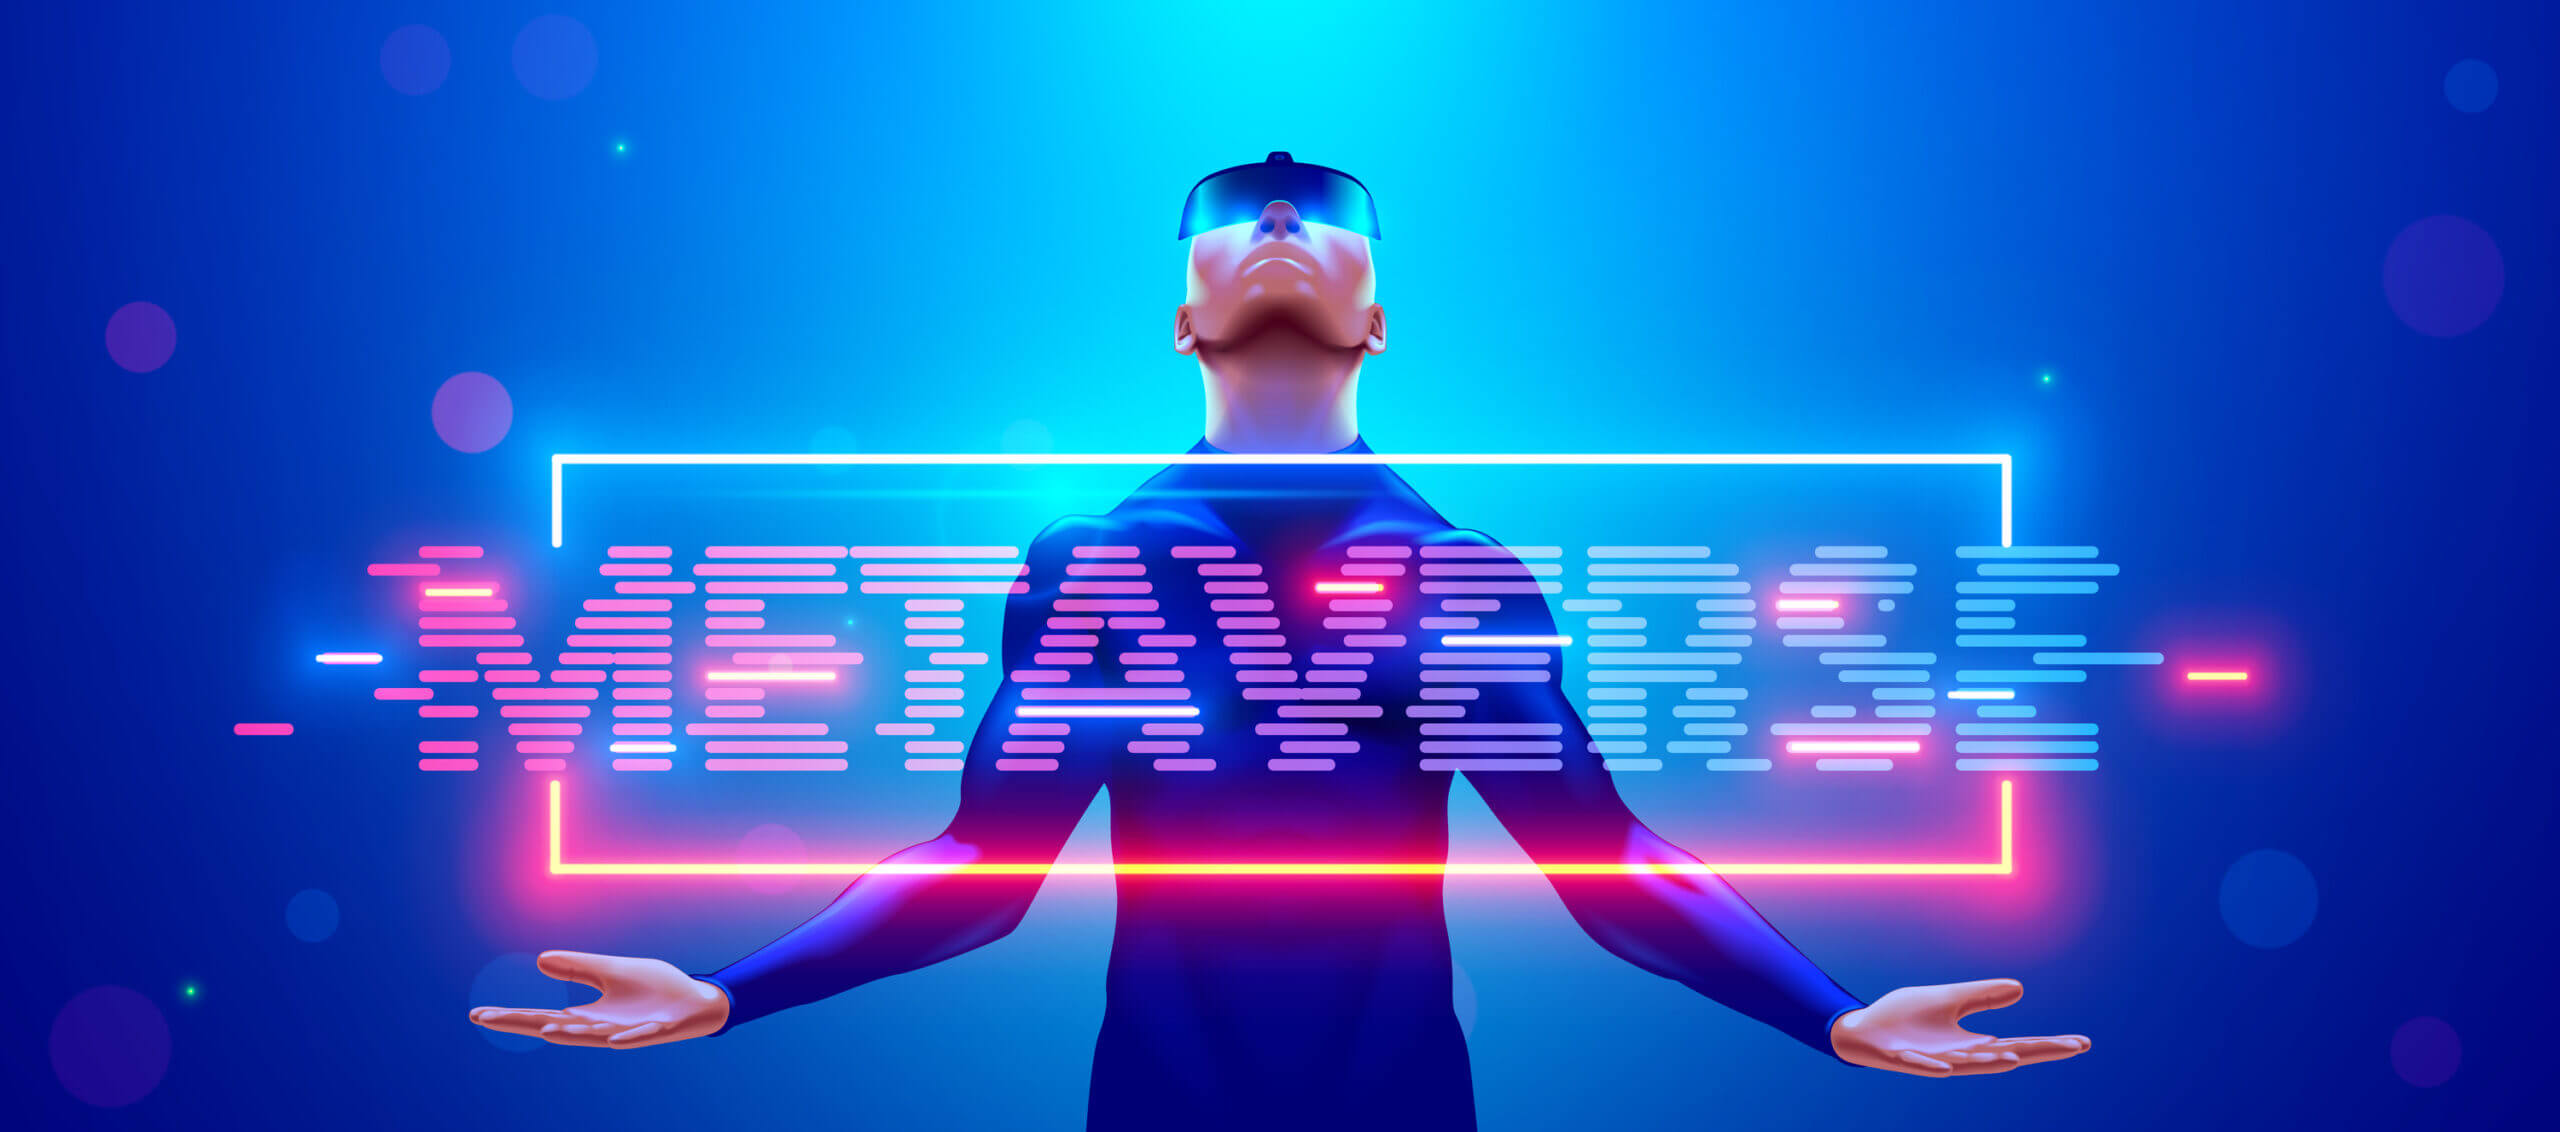 The Most Accurate Tips for Metaverse Success